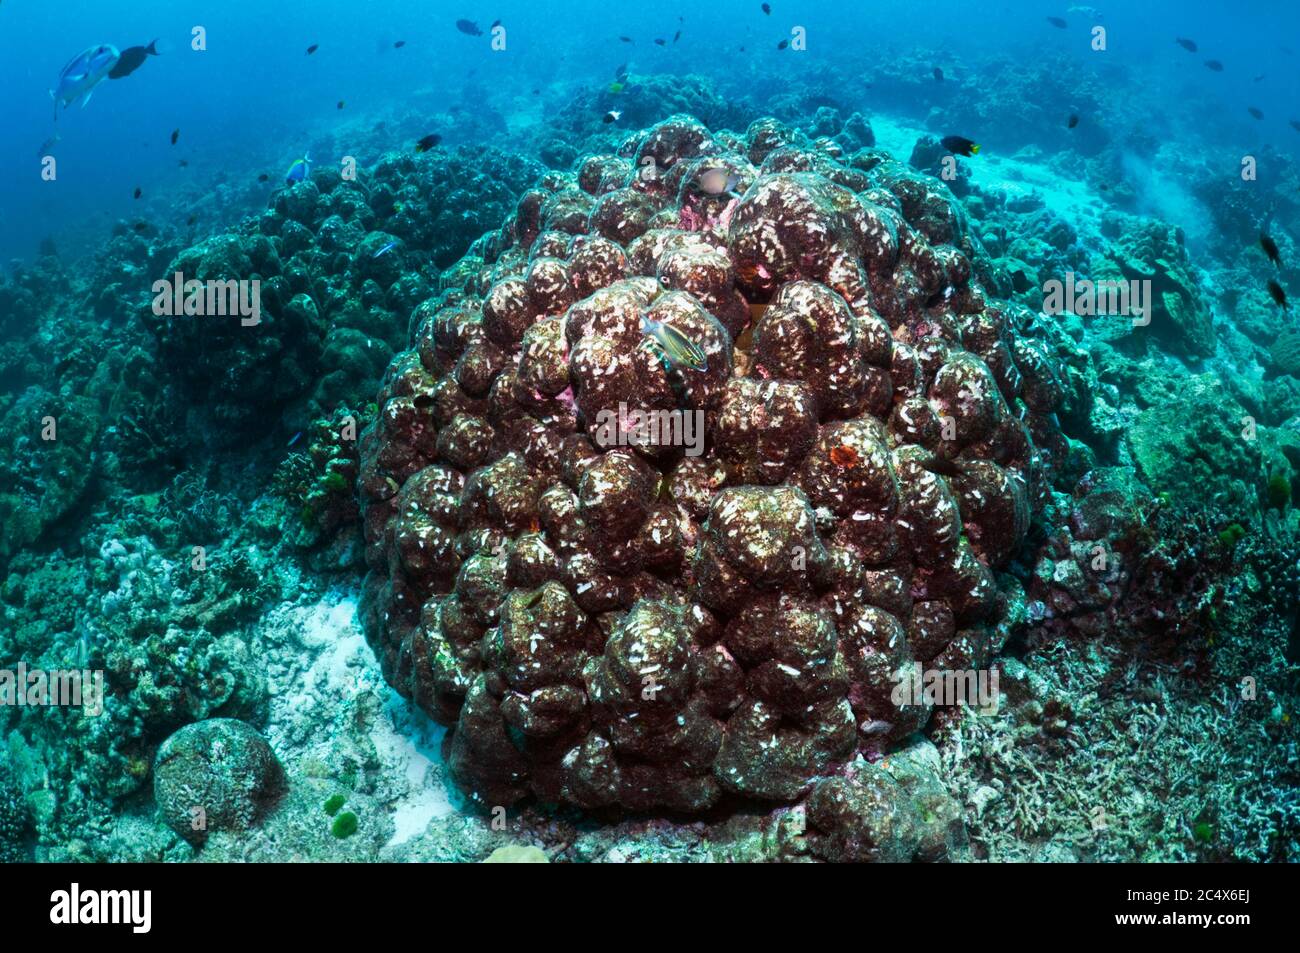 Dead porites coral boulder overgrown with algae, showing parrotfish scrapes where they have been feeding.  Andaman Sea, Thailand. Stock Photo